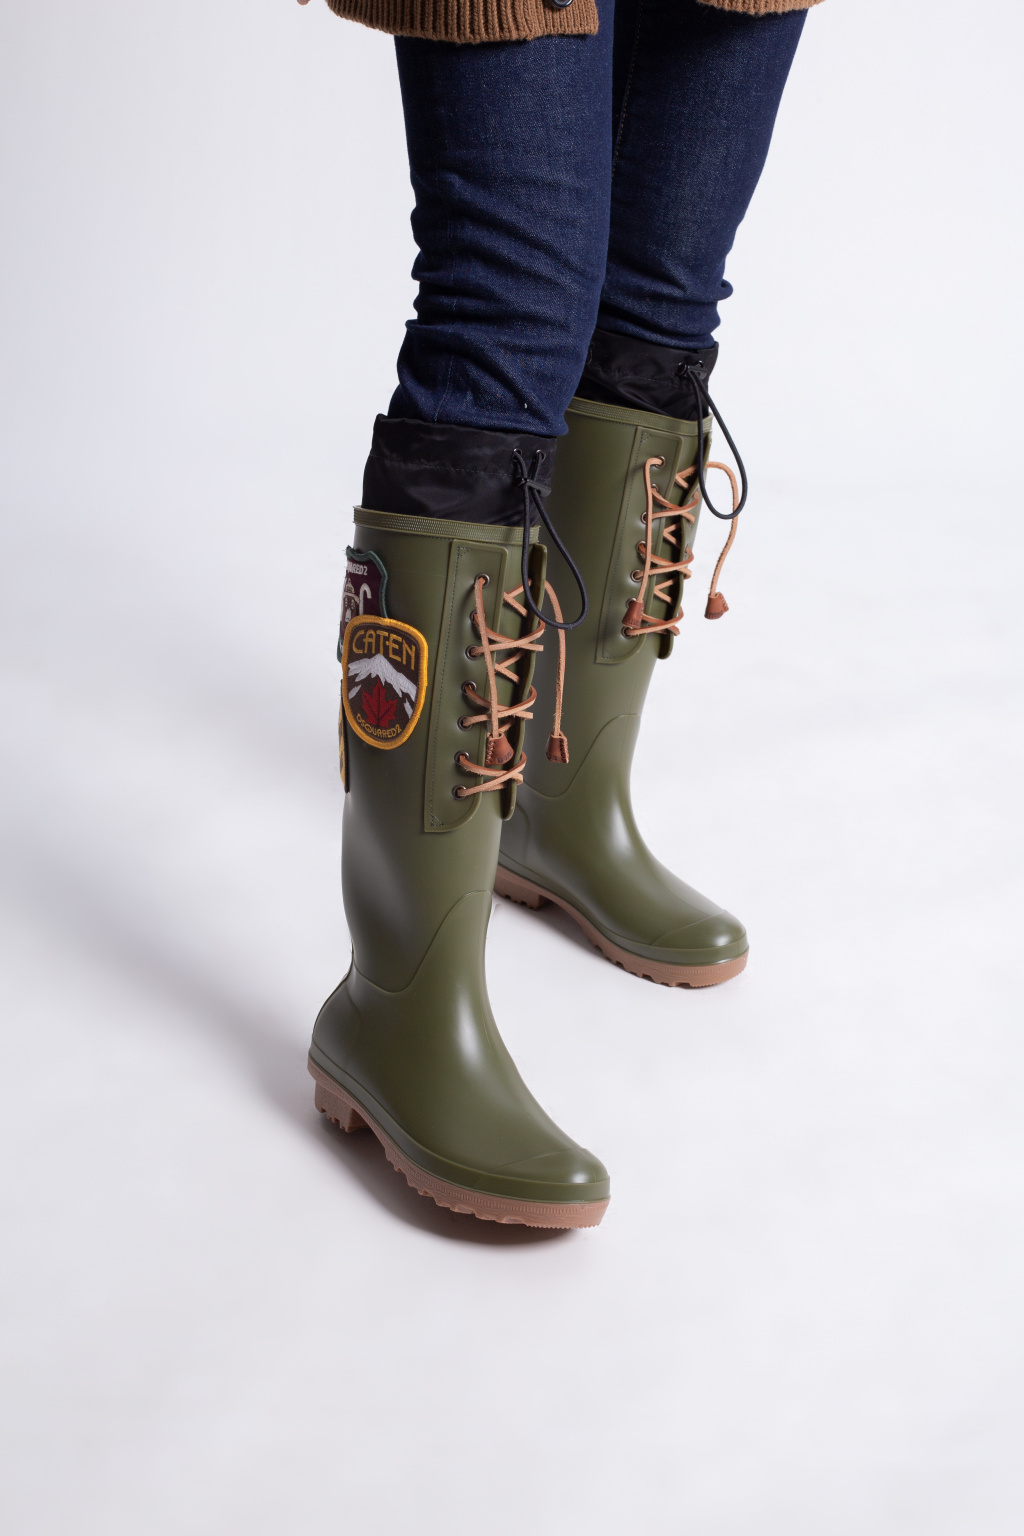 Dsquared2 ‘Dook’ rain boots with patches